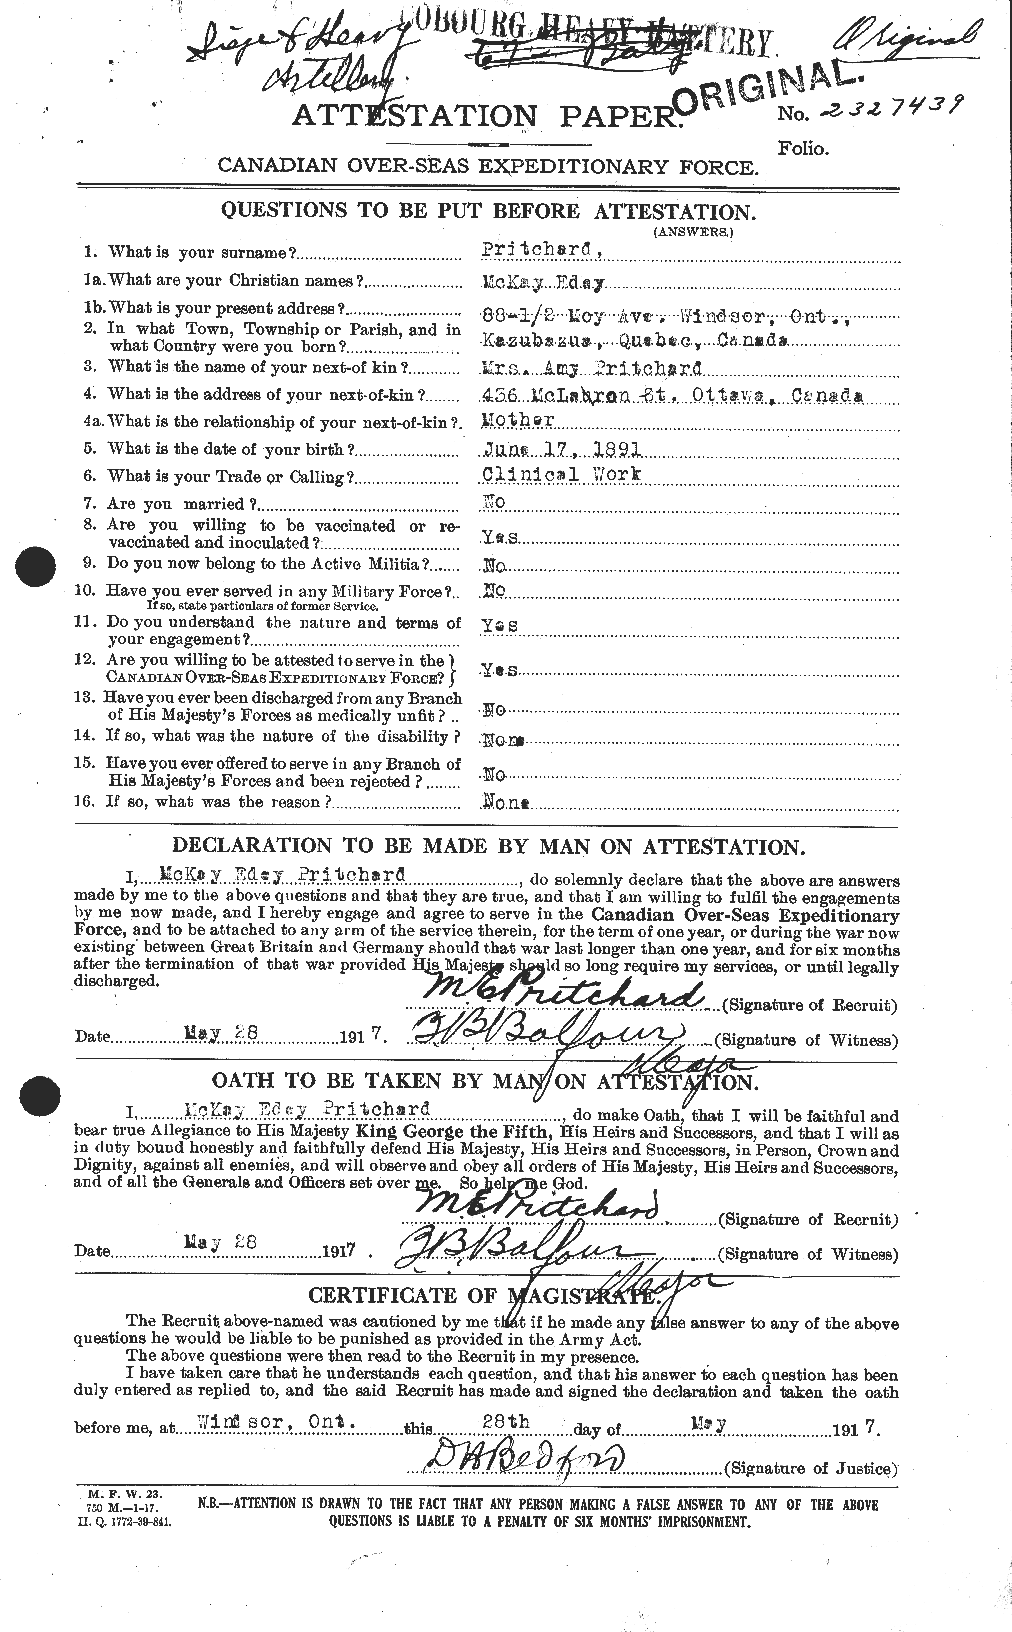 Personnel Records of the First World War - CEF 588581a